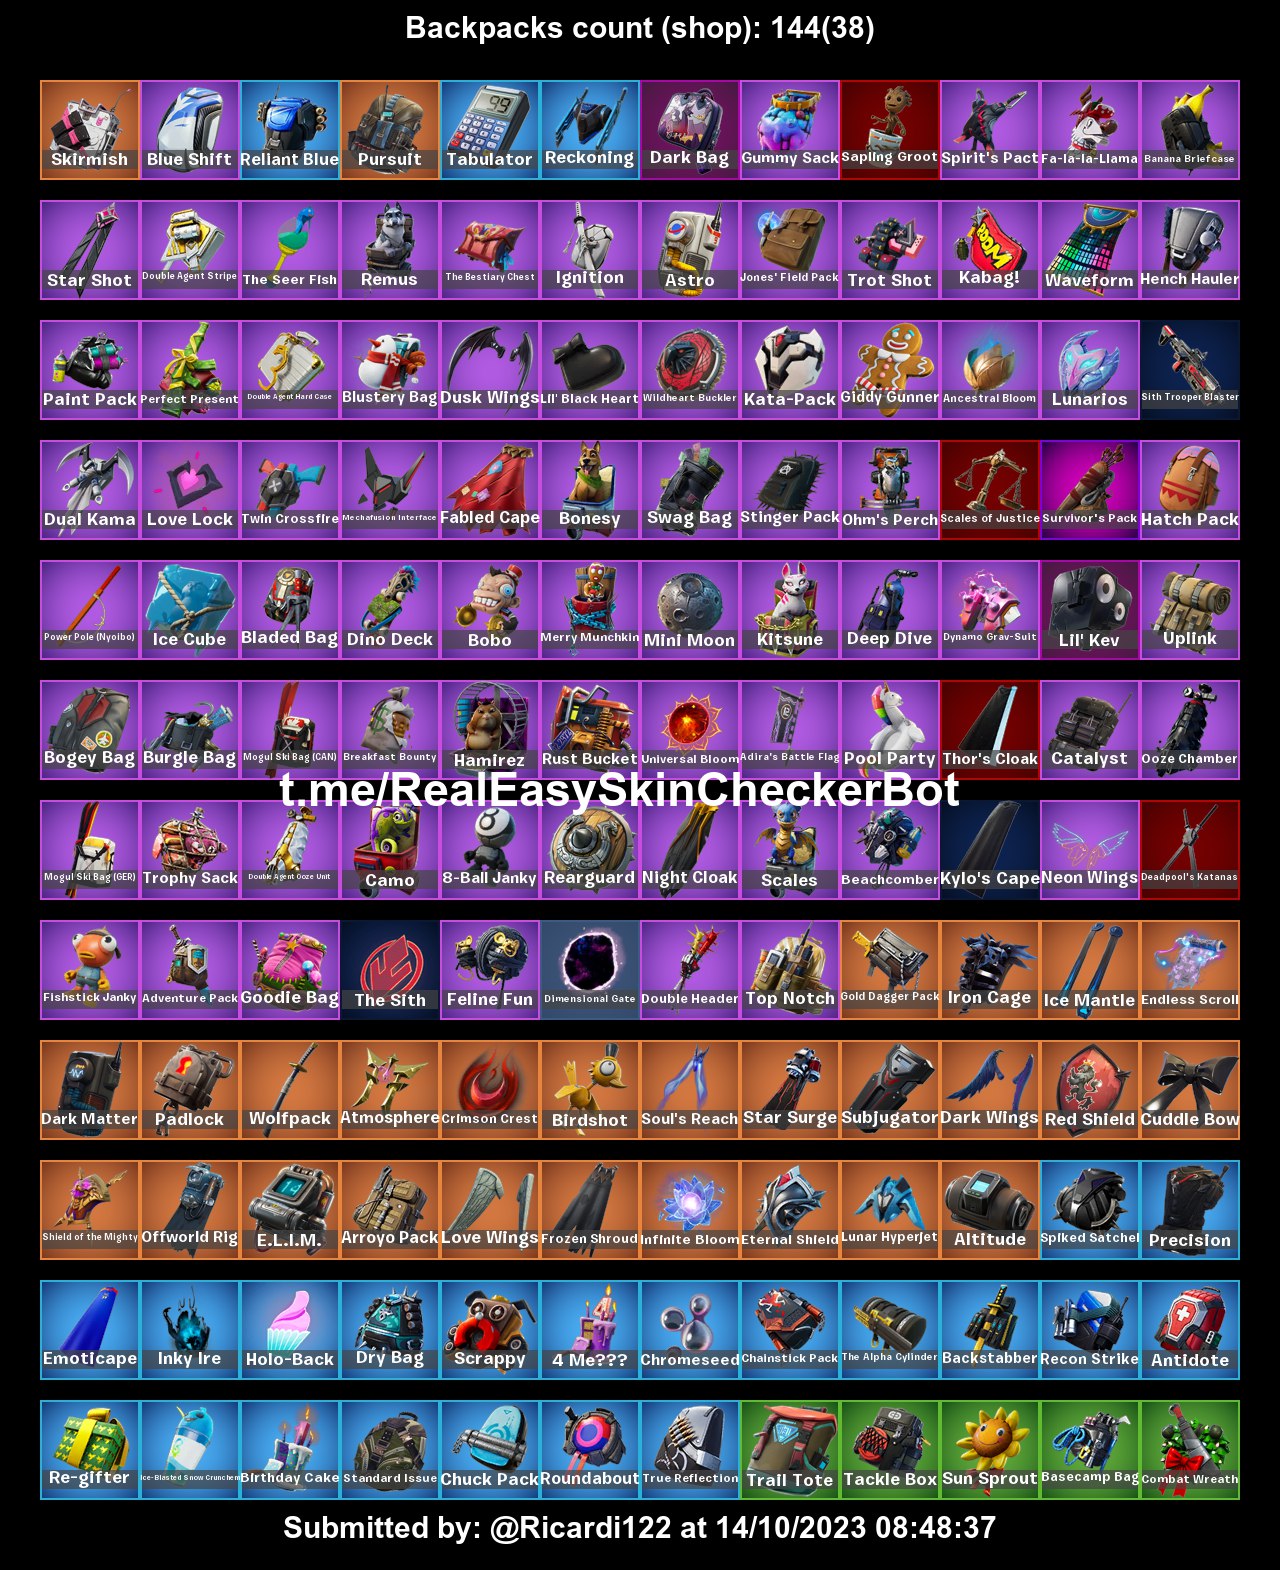 163 Skins F/A PC (N):The Reaper/ Warpaint/ Take The L/ Fresh/ Fixer/ Inferno/ Son Goku/ Raven/ Mogul Master (CAN)/ Trilogy/ Rogue Agent/ Prodigy